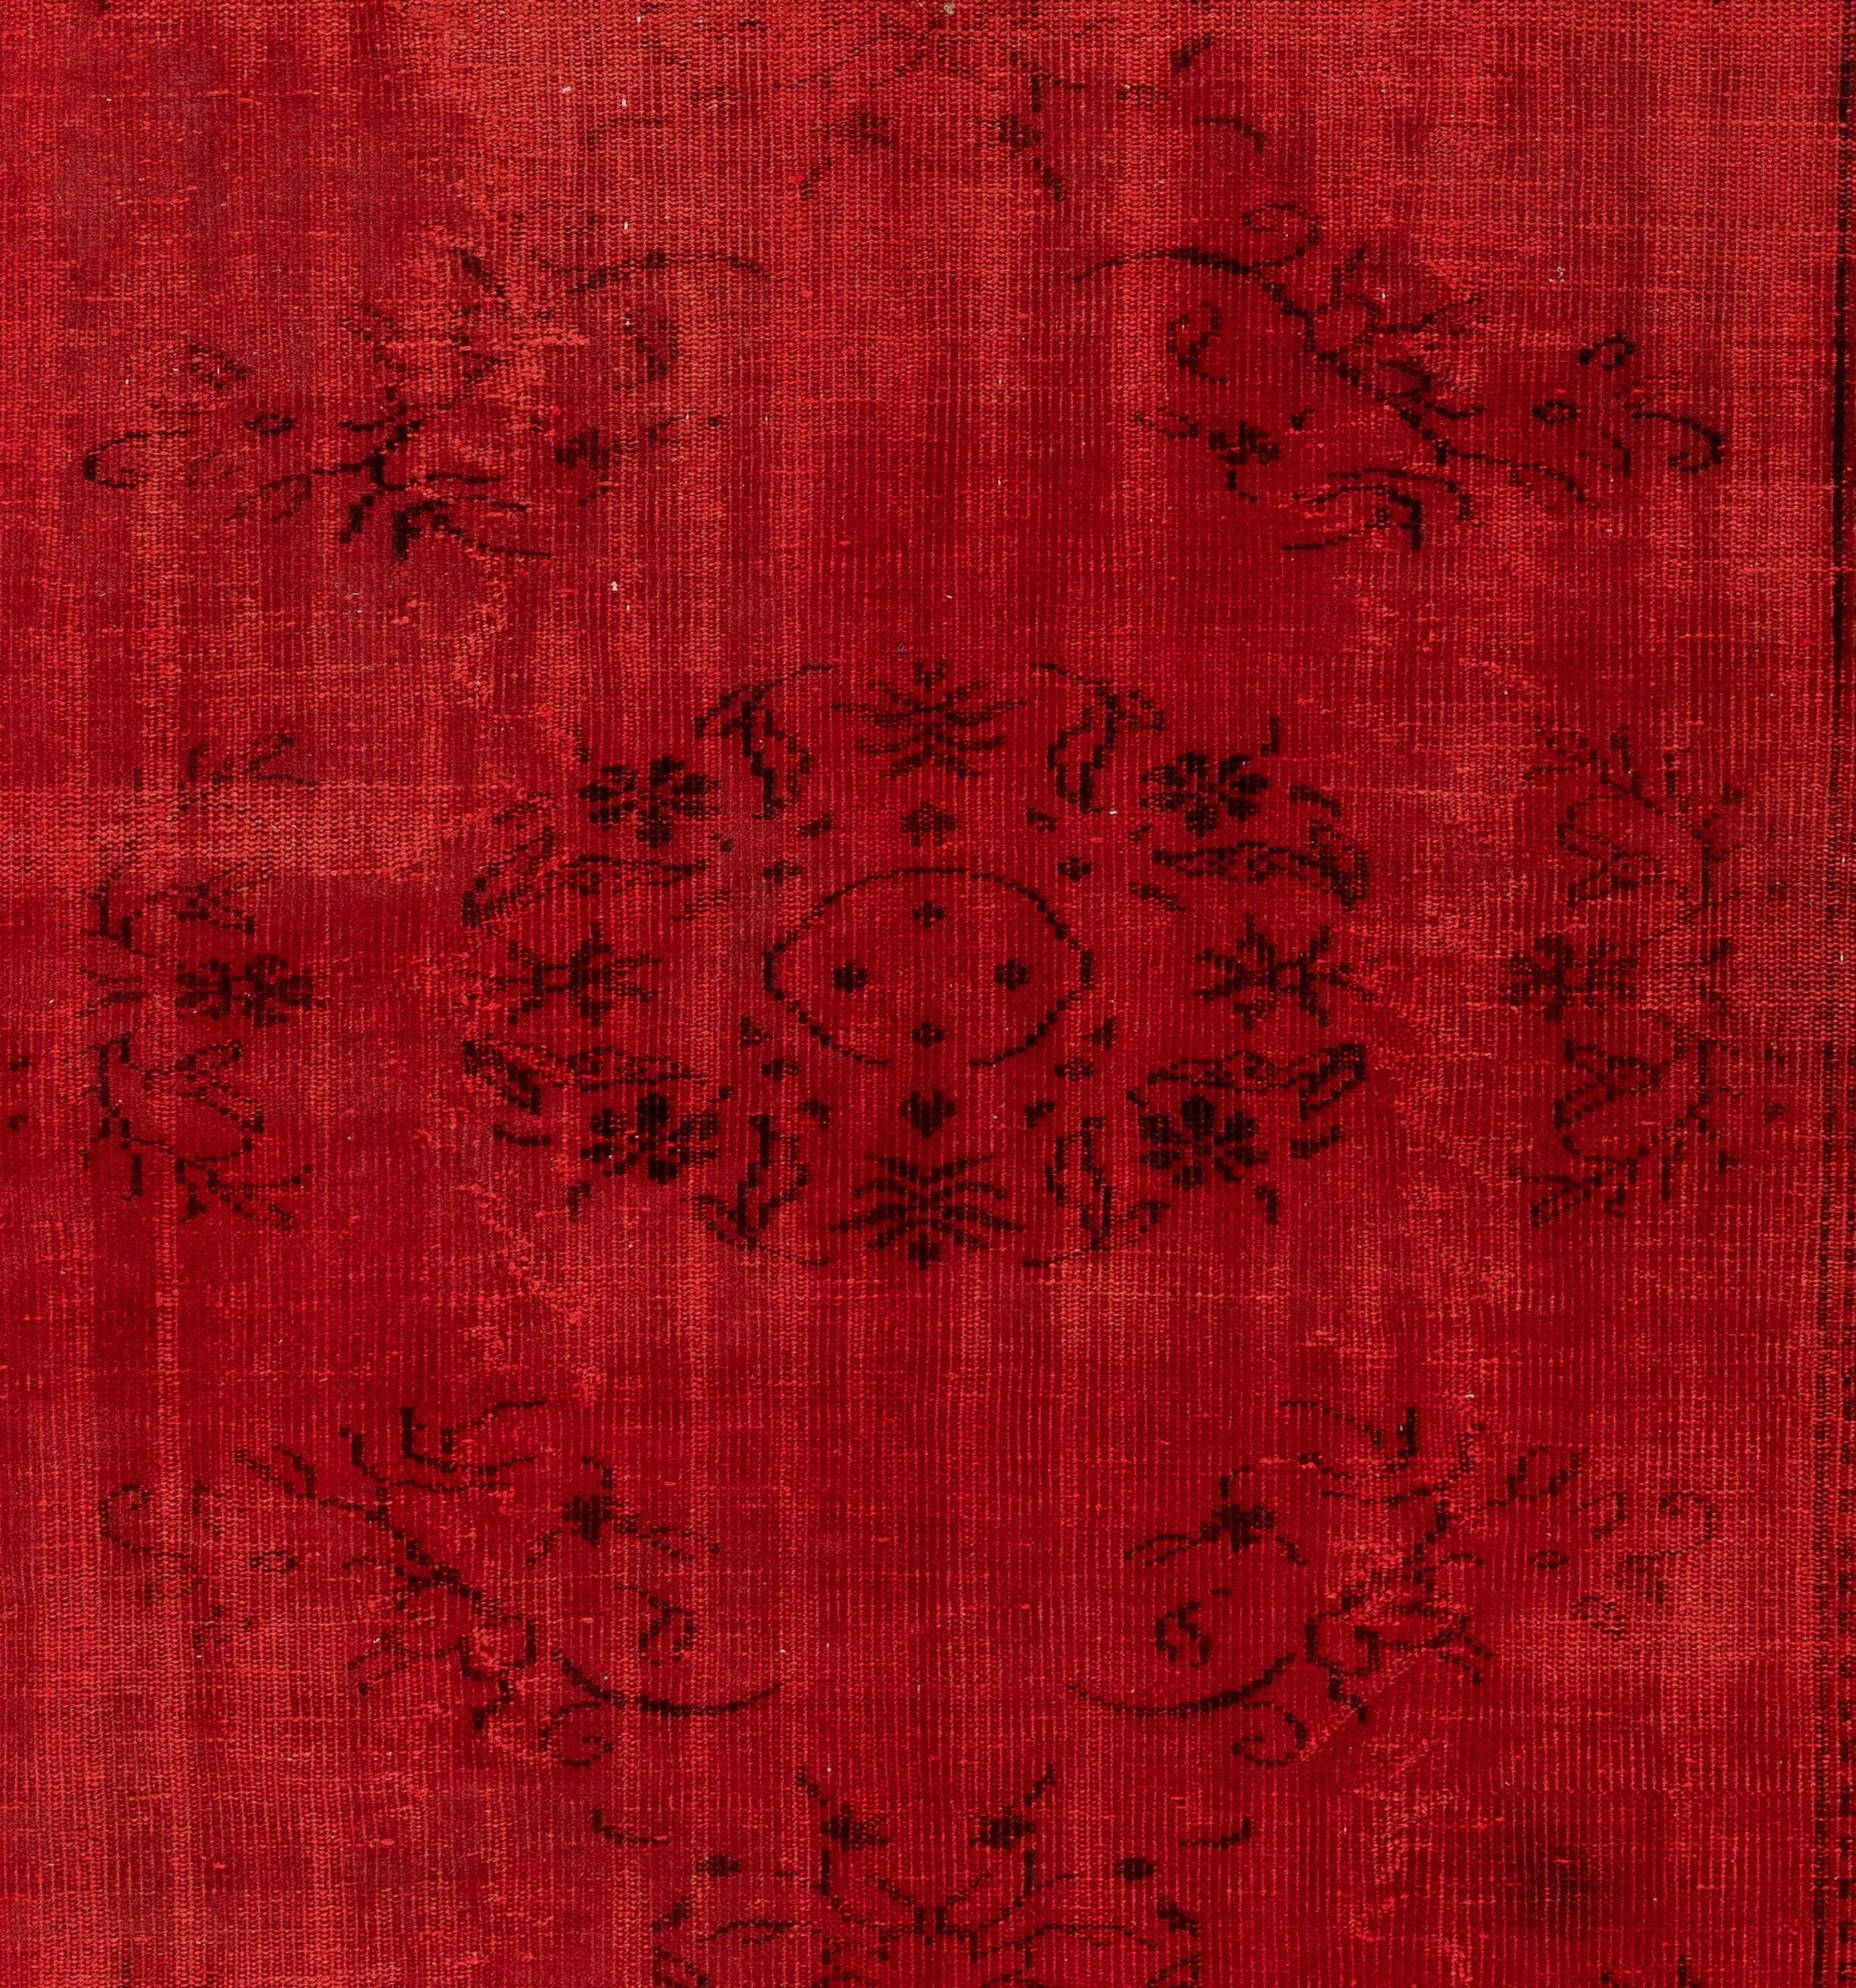 Turkish 5.8 x 8.8 Ft Vintage Rug Overdyed in Red. Great for Modern Home & Office Decor